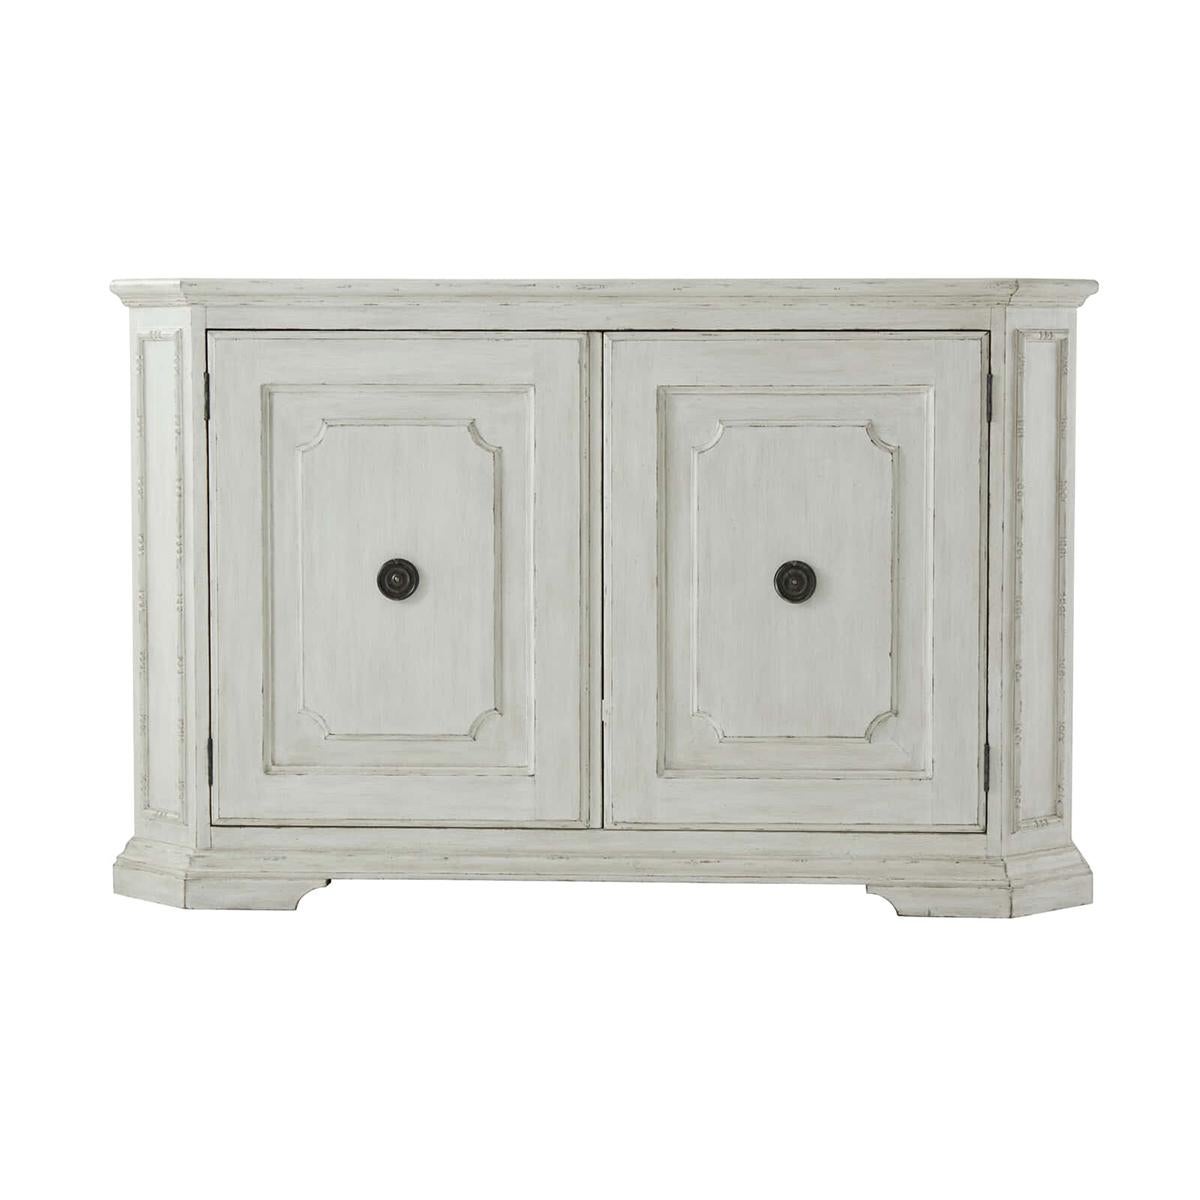 Northern European painted buffet with a rectangular top having canted corners with paneled and angled uprights, two cabinet doors, the interior with two adjustable shelves and raised on molded bracket feet.

Dimensions: 65